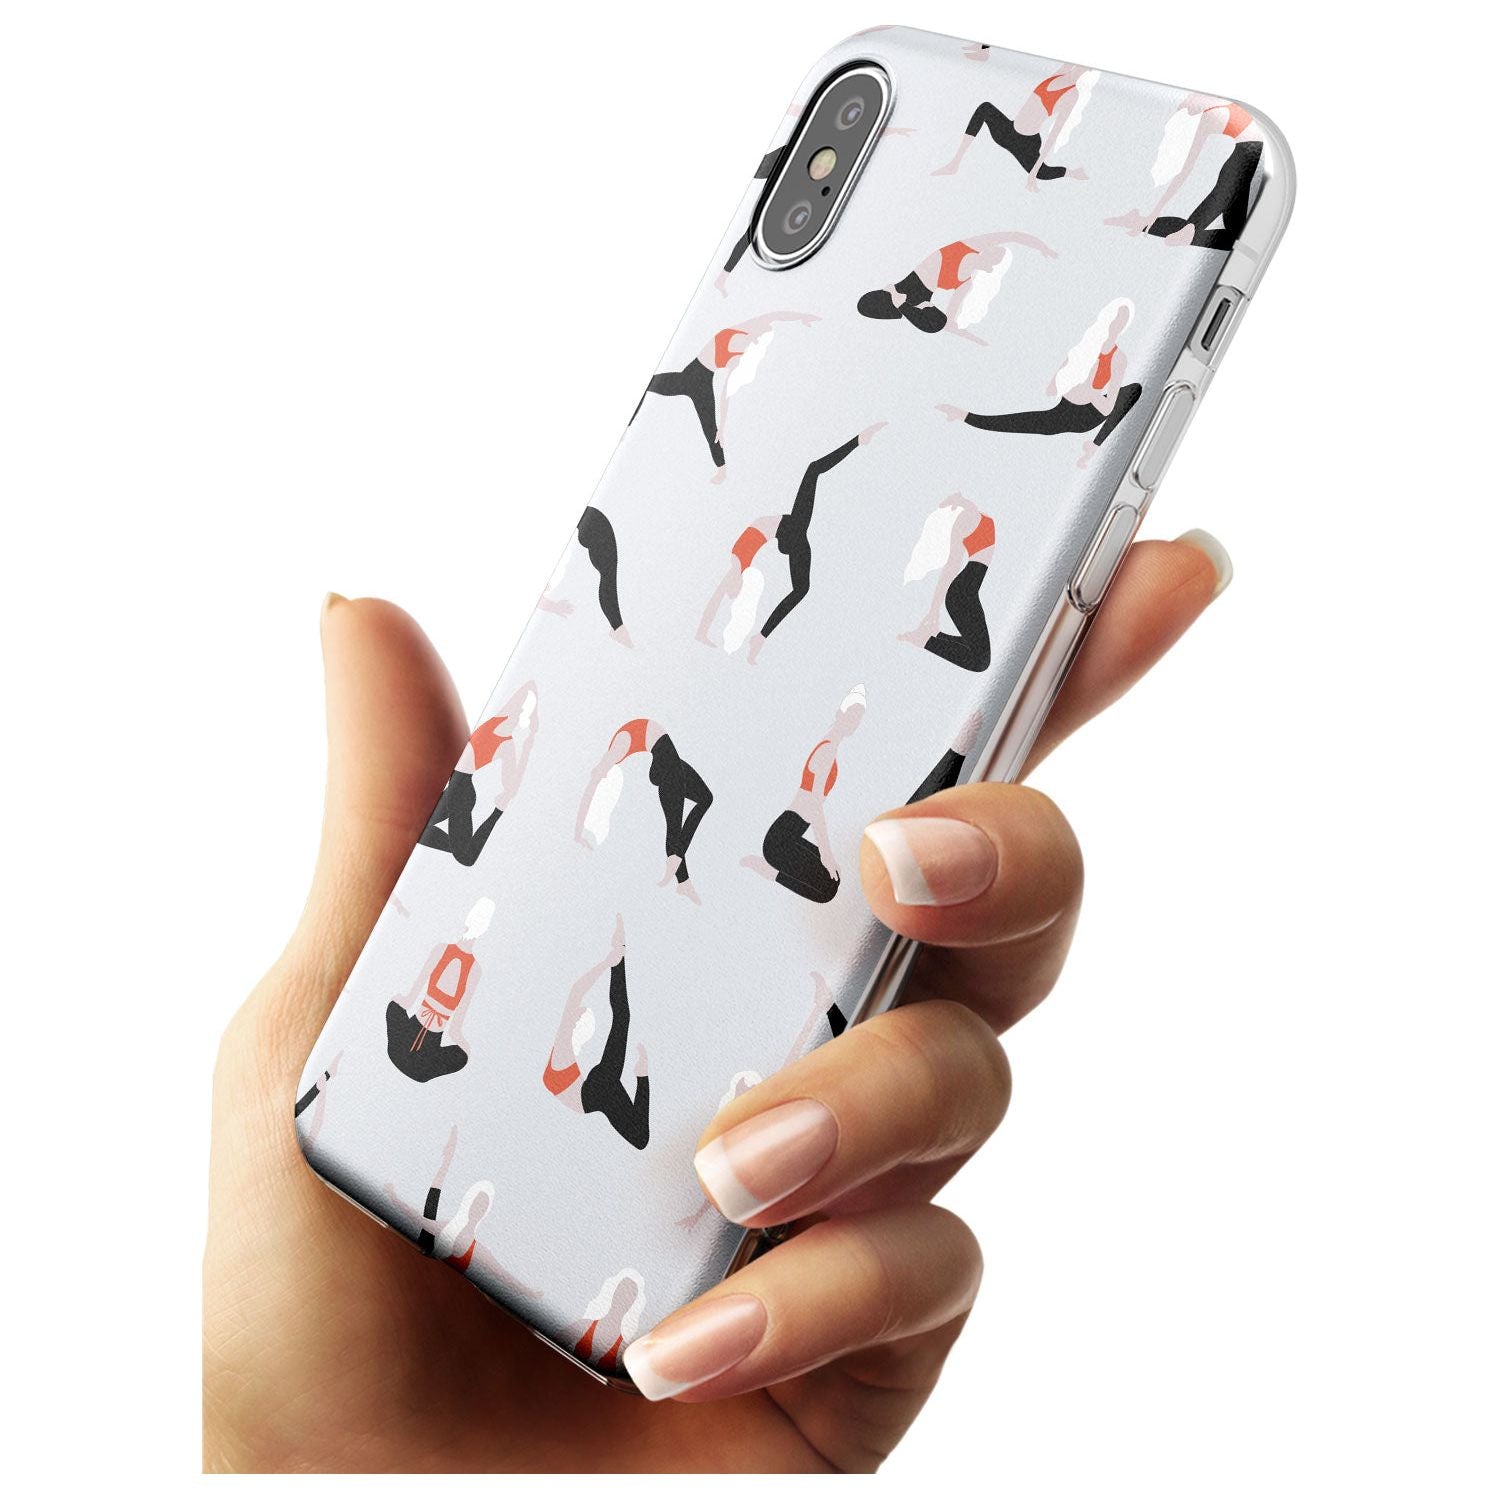 Yoga Poses Black Impact Phone Case for iPhone X XS Max XR